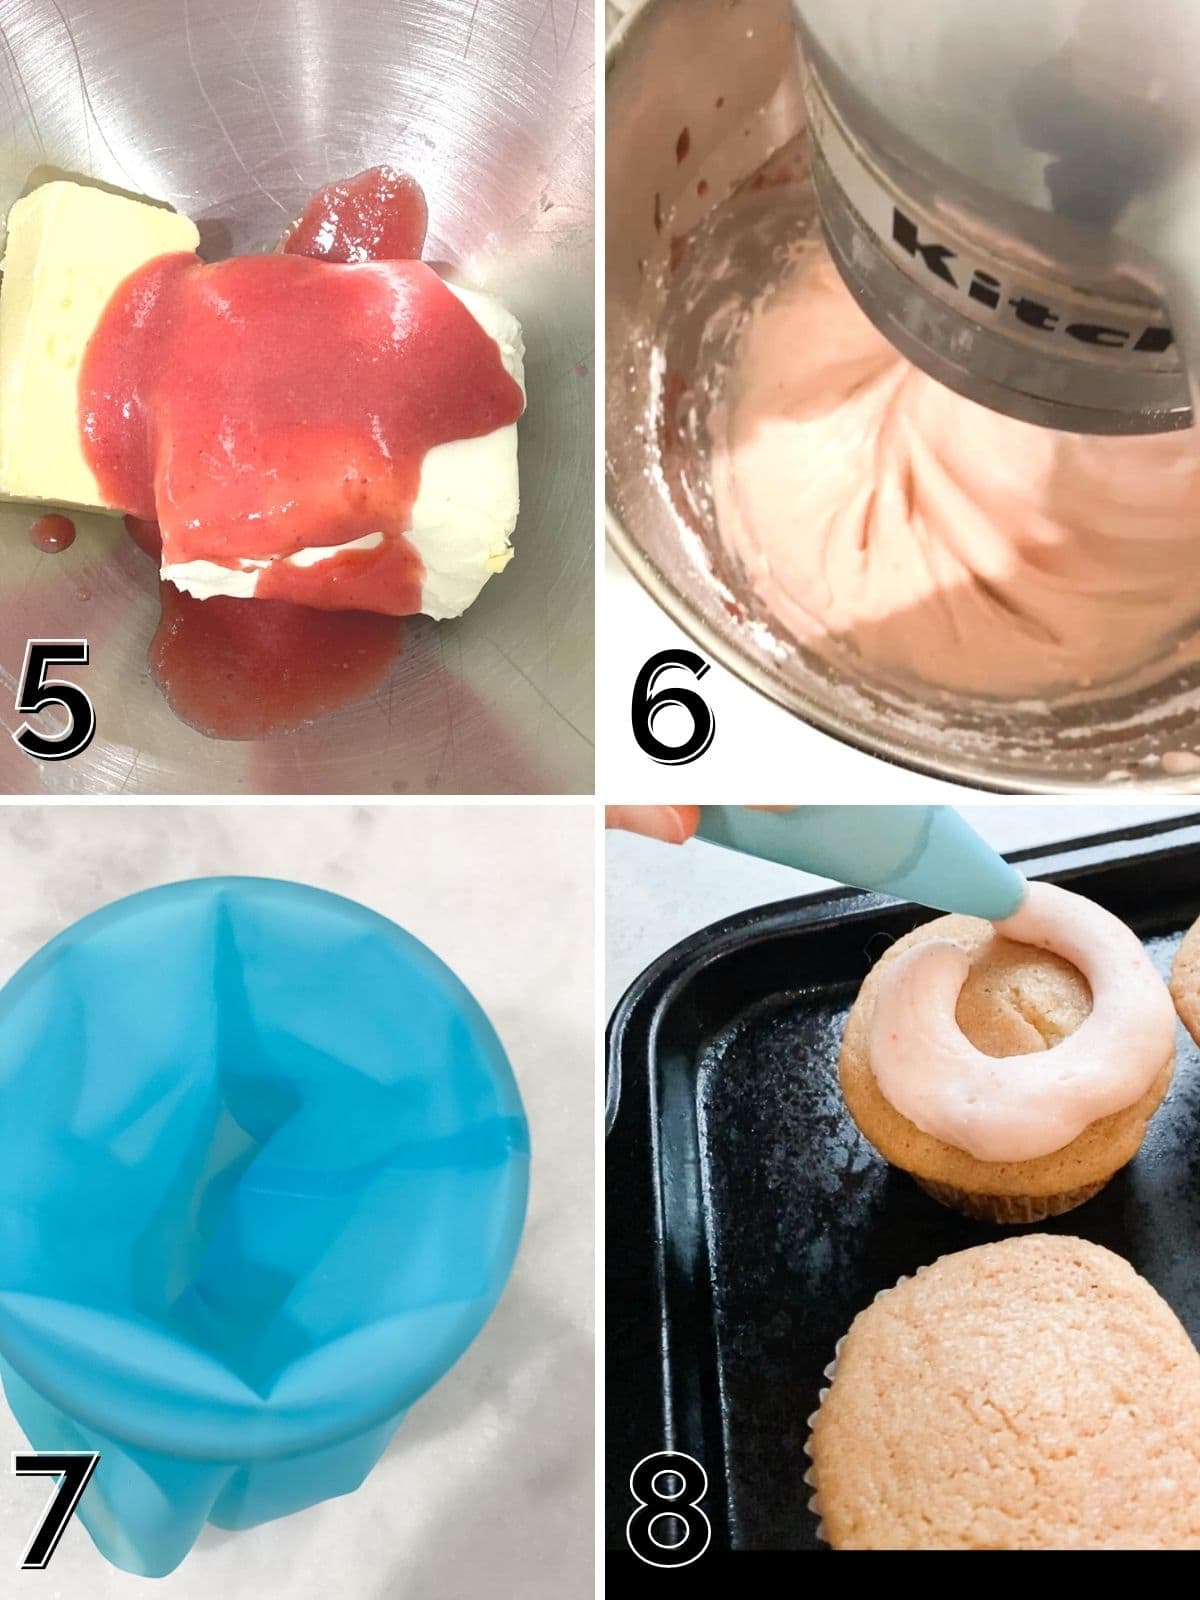 Mixing together cream cheese frosting and piping it on a cupcake.